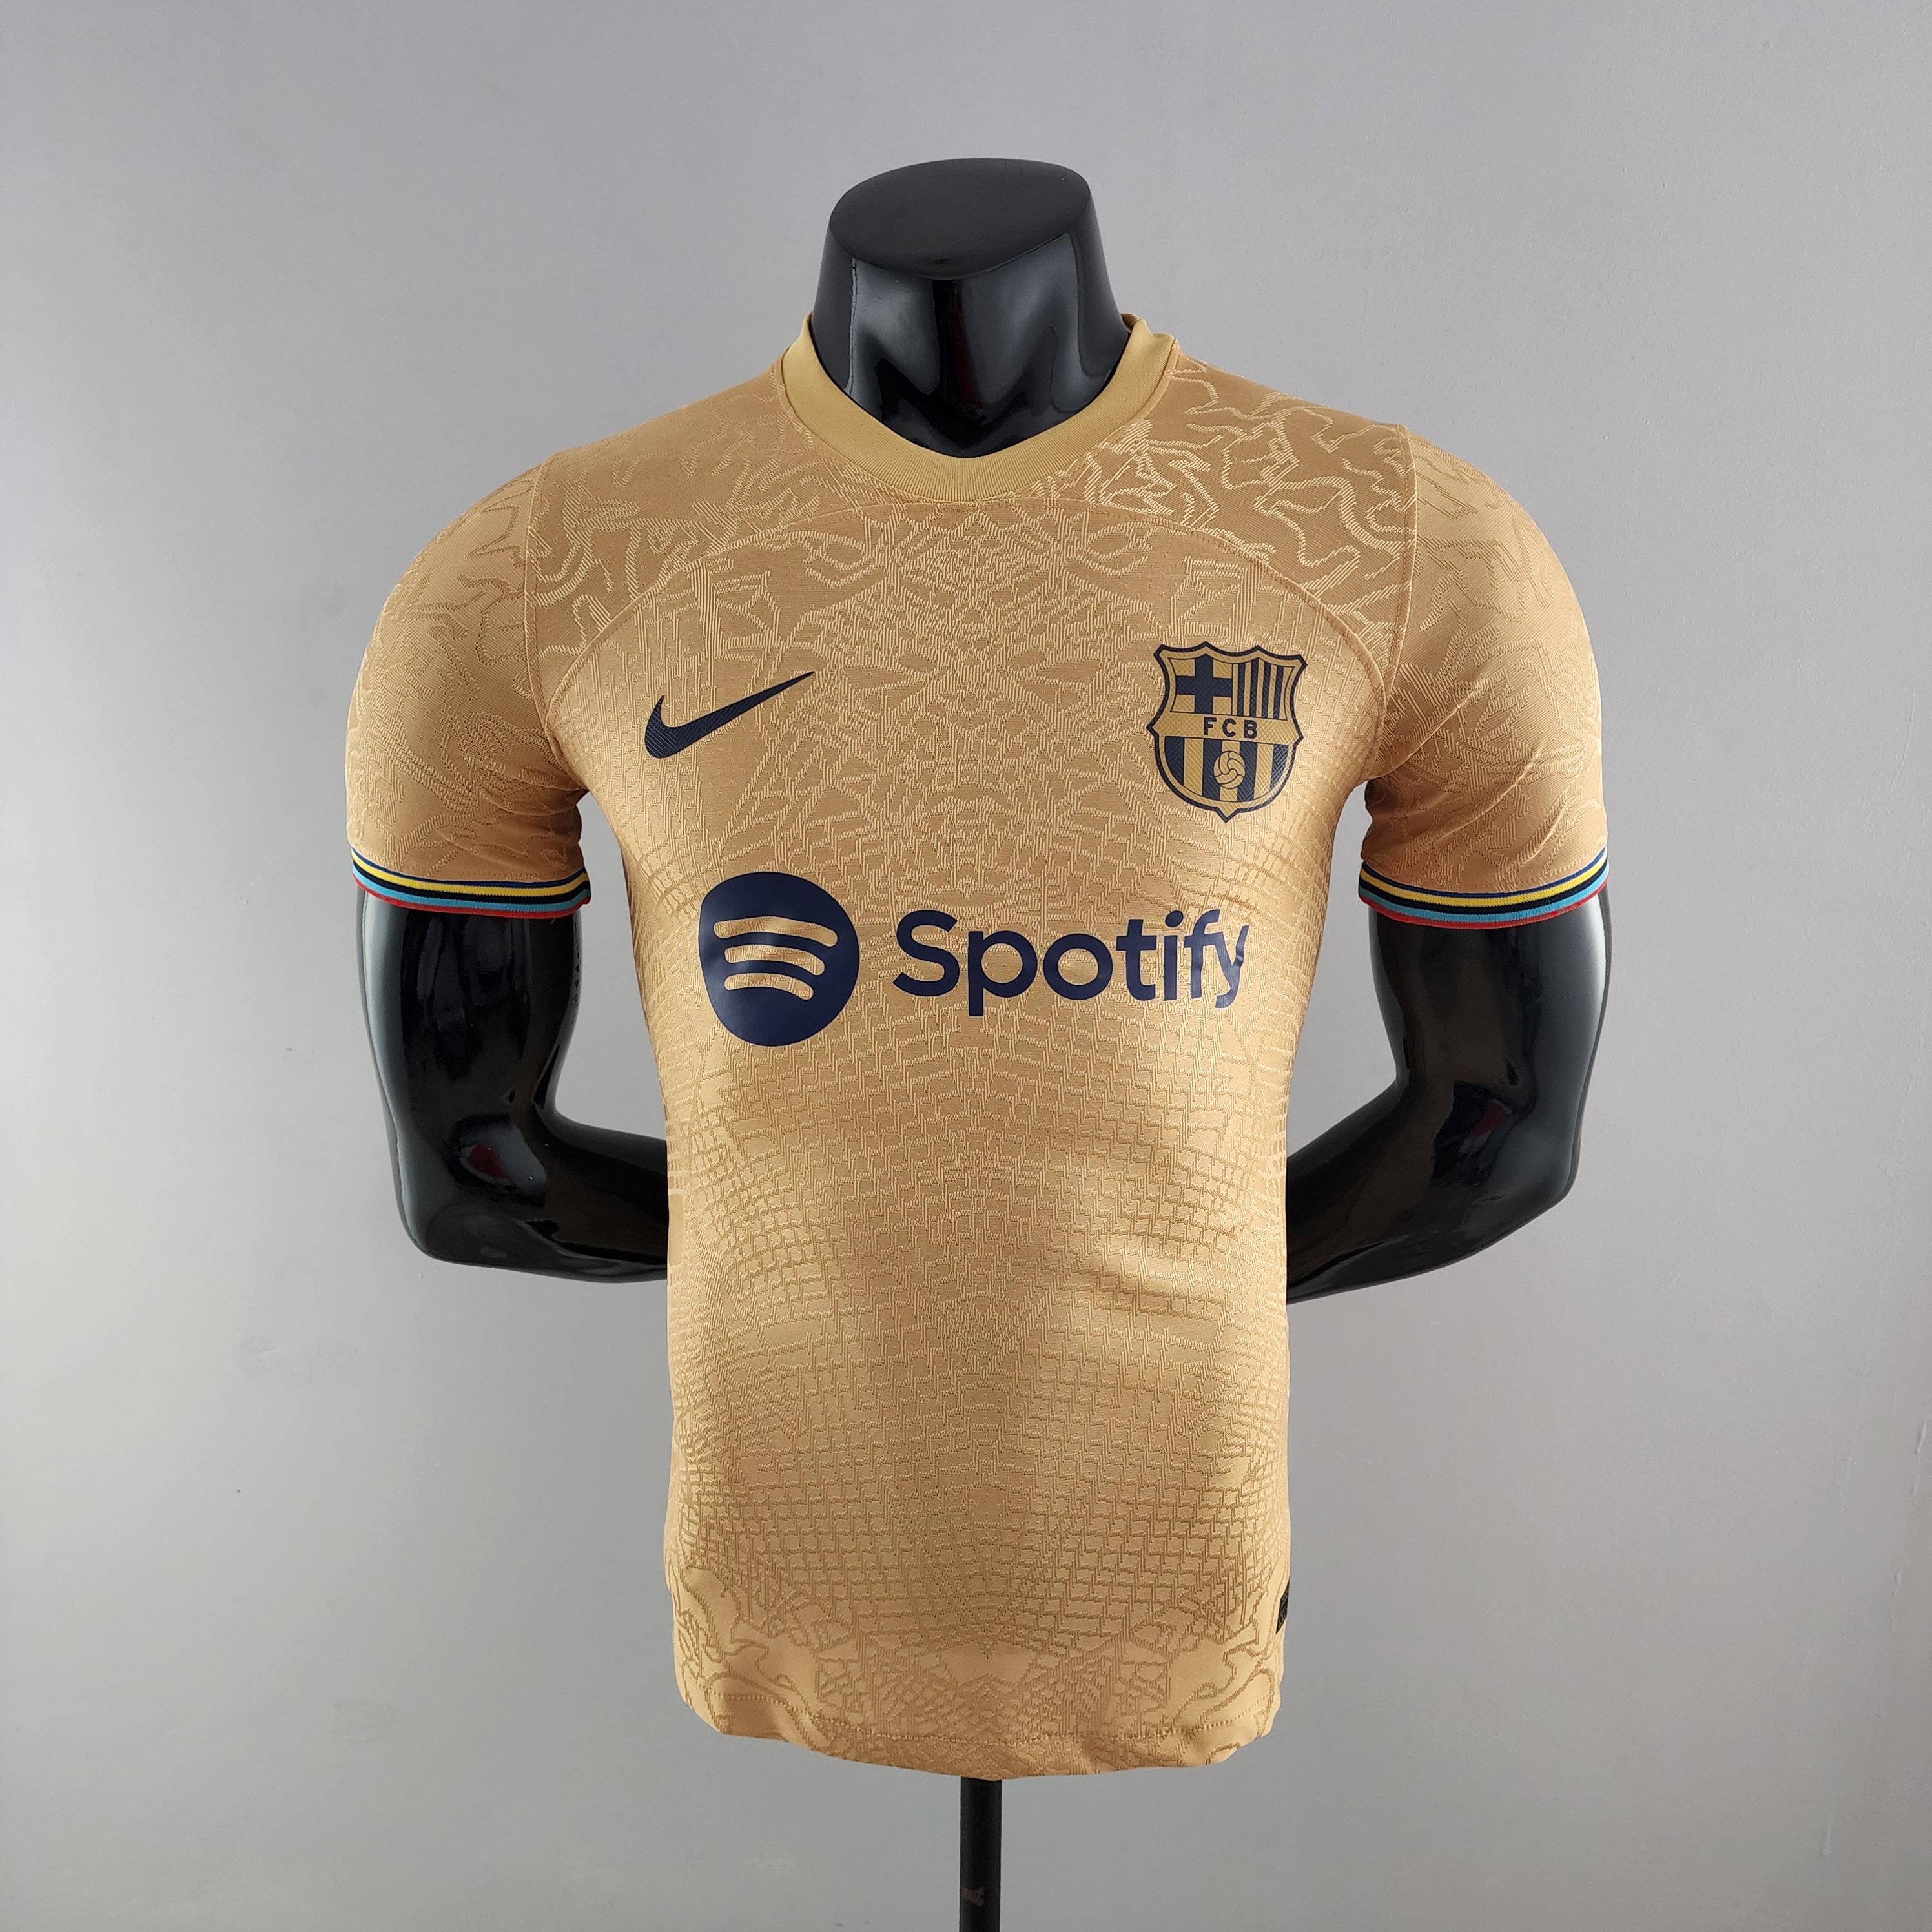 Why did Nike copy South African Football team, Kaizer Chiefs FC, jersey for  the Barcelona 2020/2021 away kit? - Quora